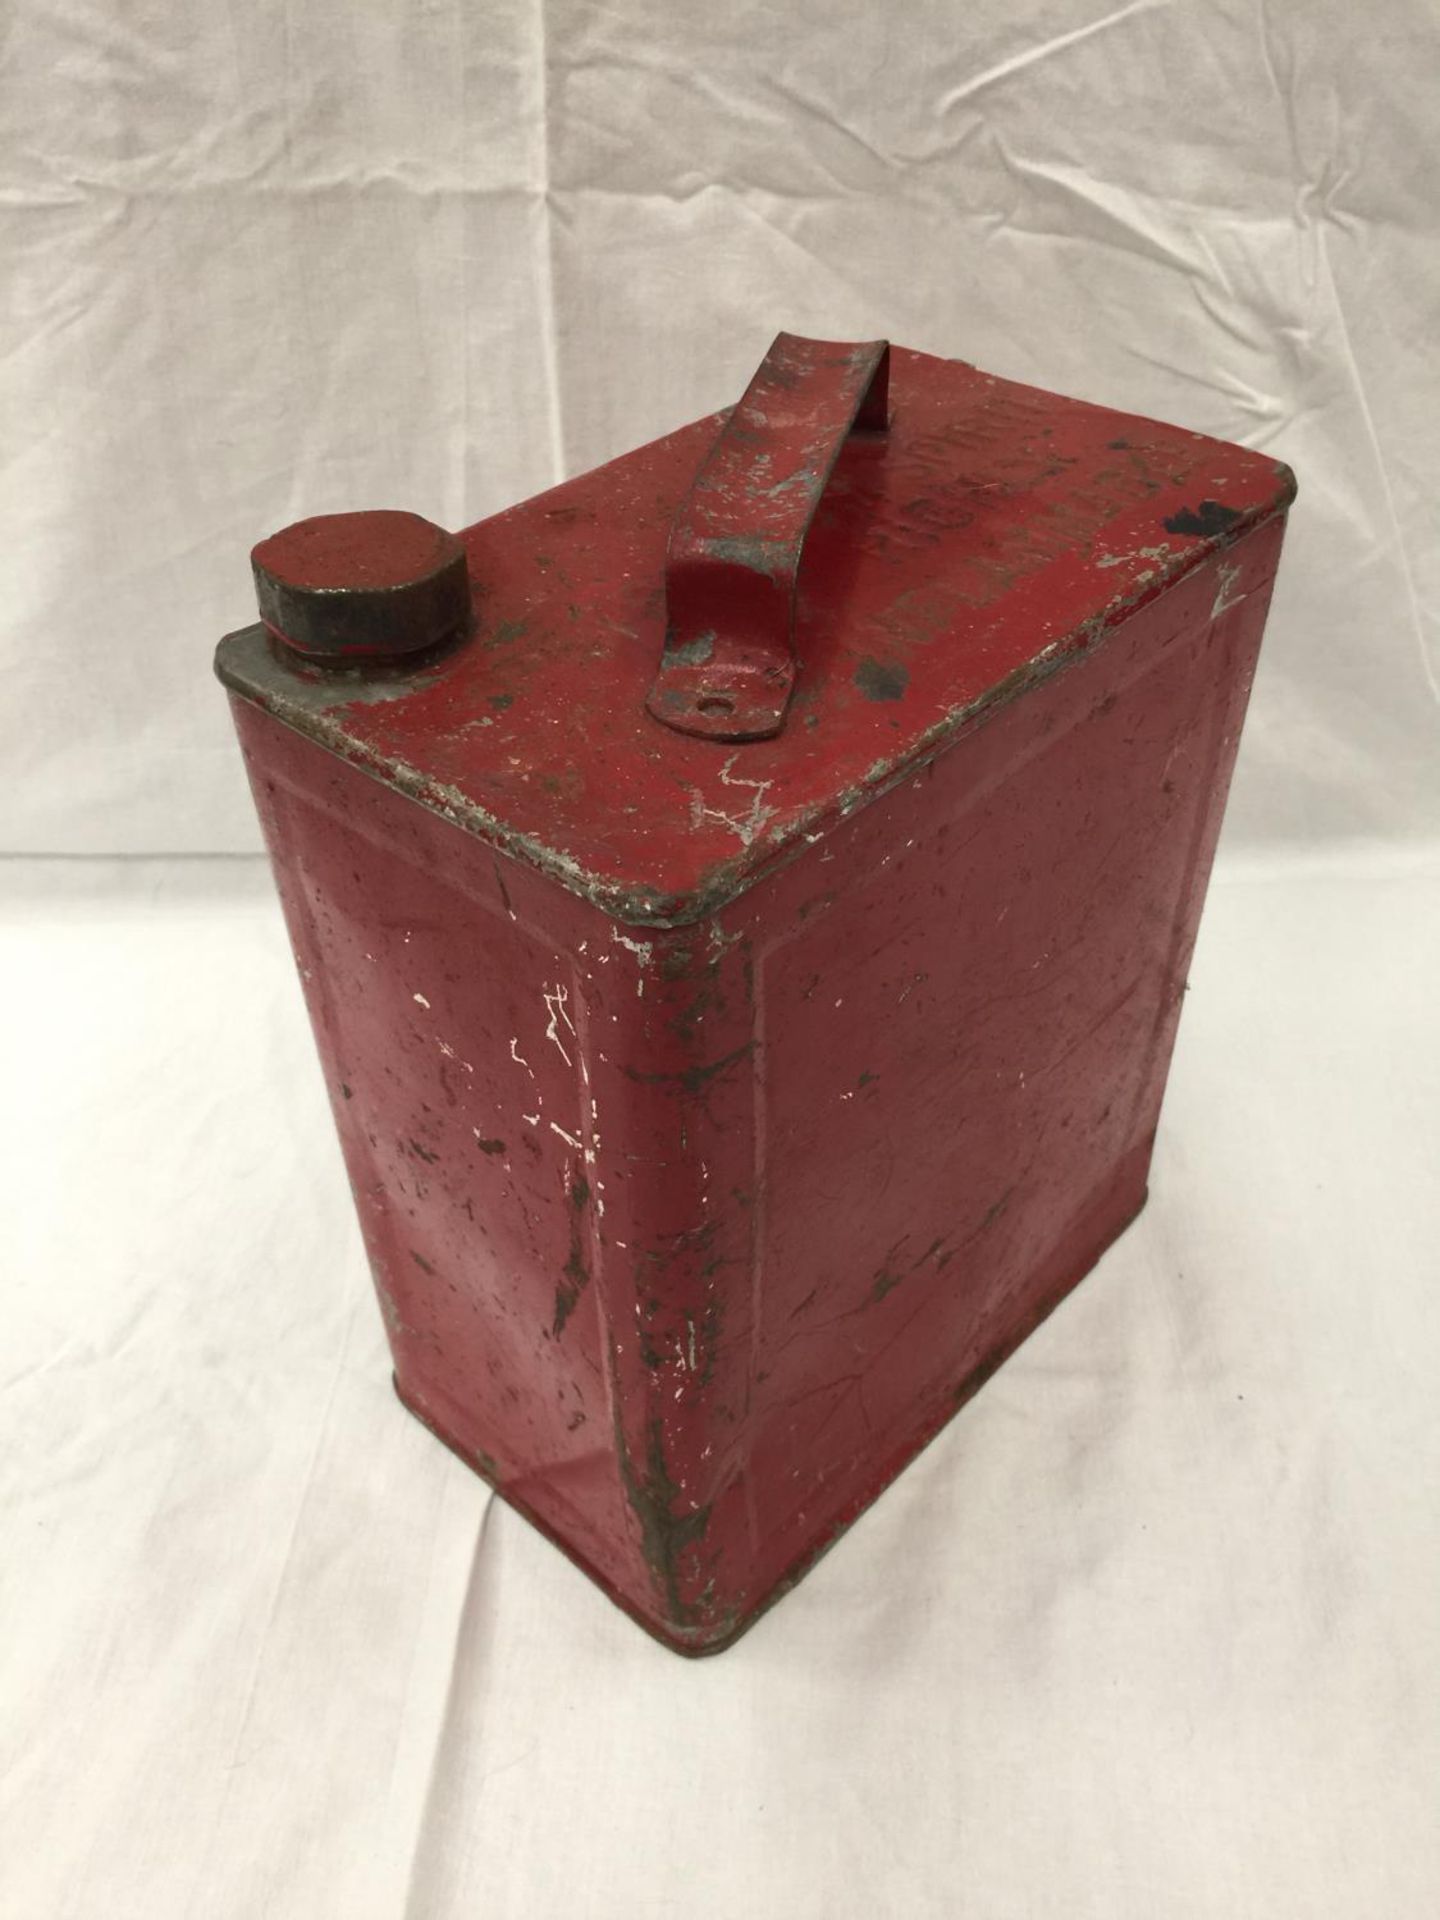 A VINTAGE RED PETROL CAN - Image 3 of 3